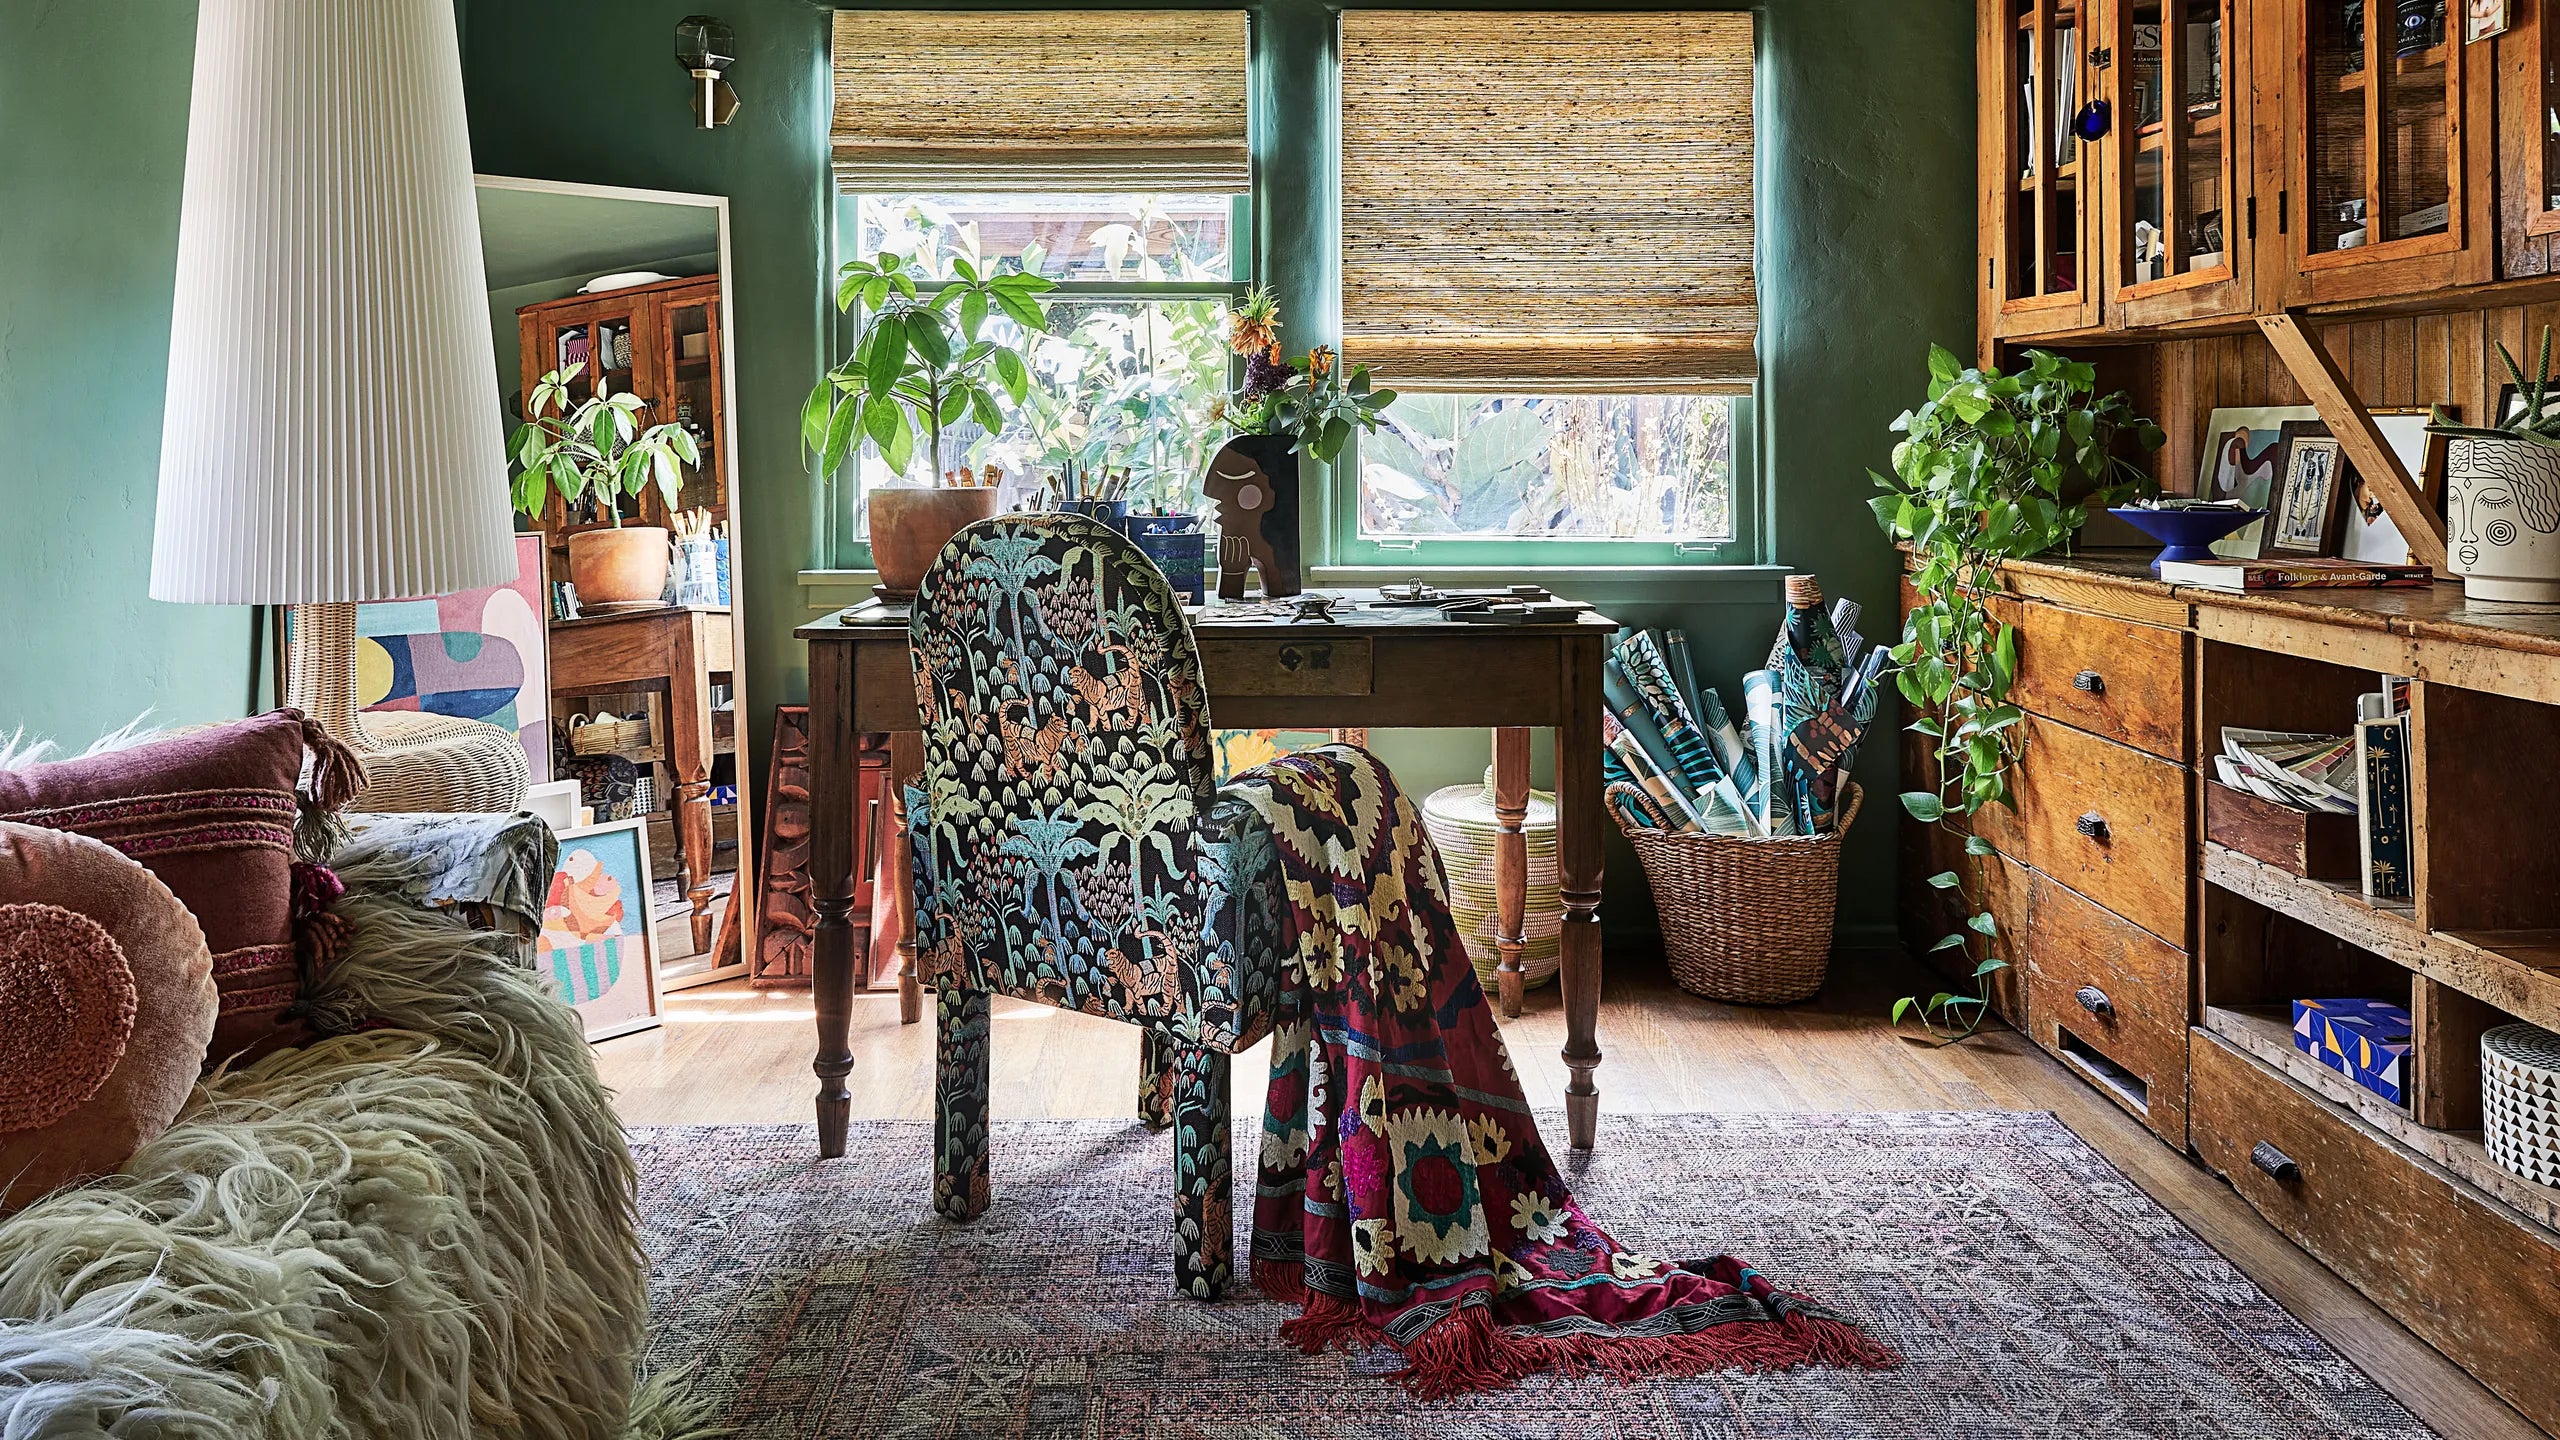 Global-inspired boho decor featuring rugs and textiles from various countries